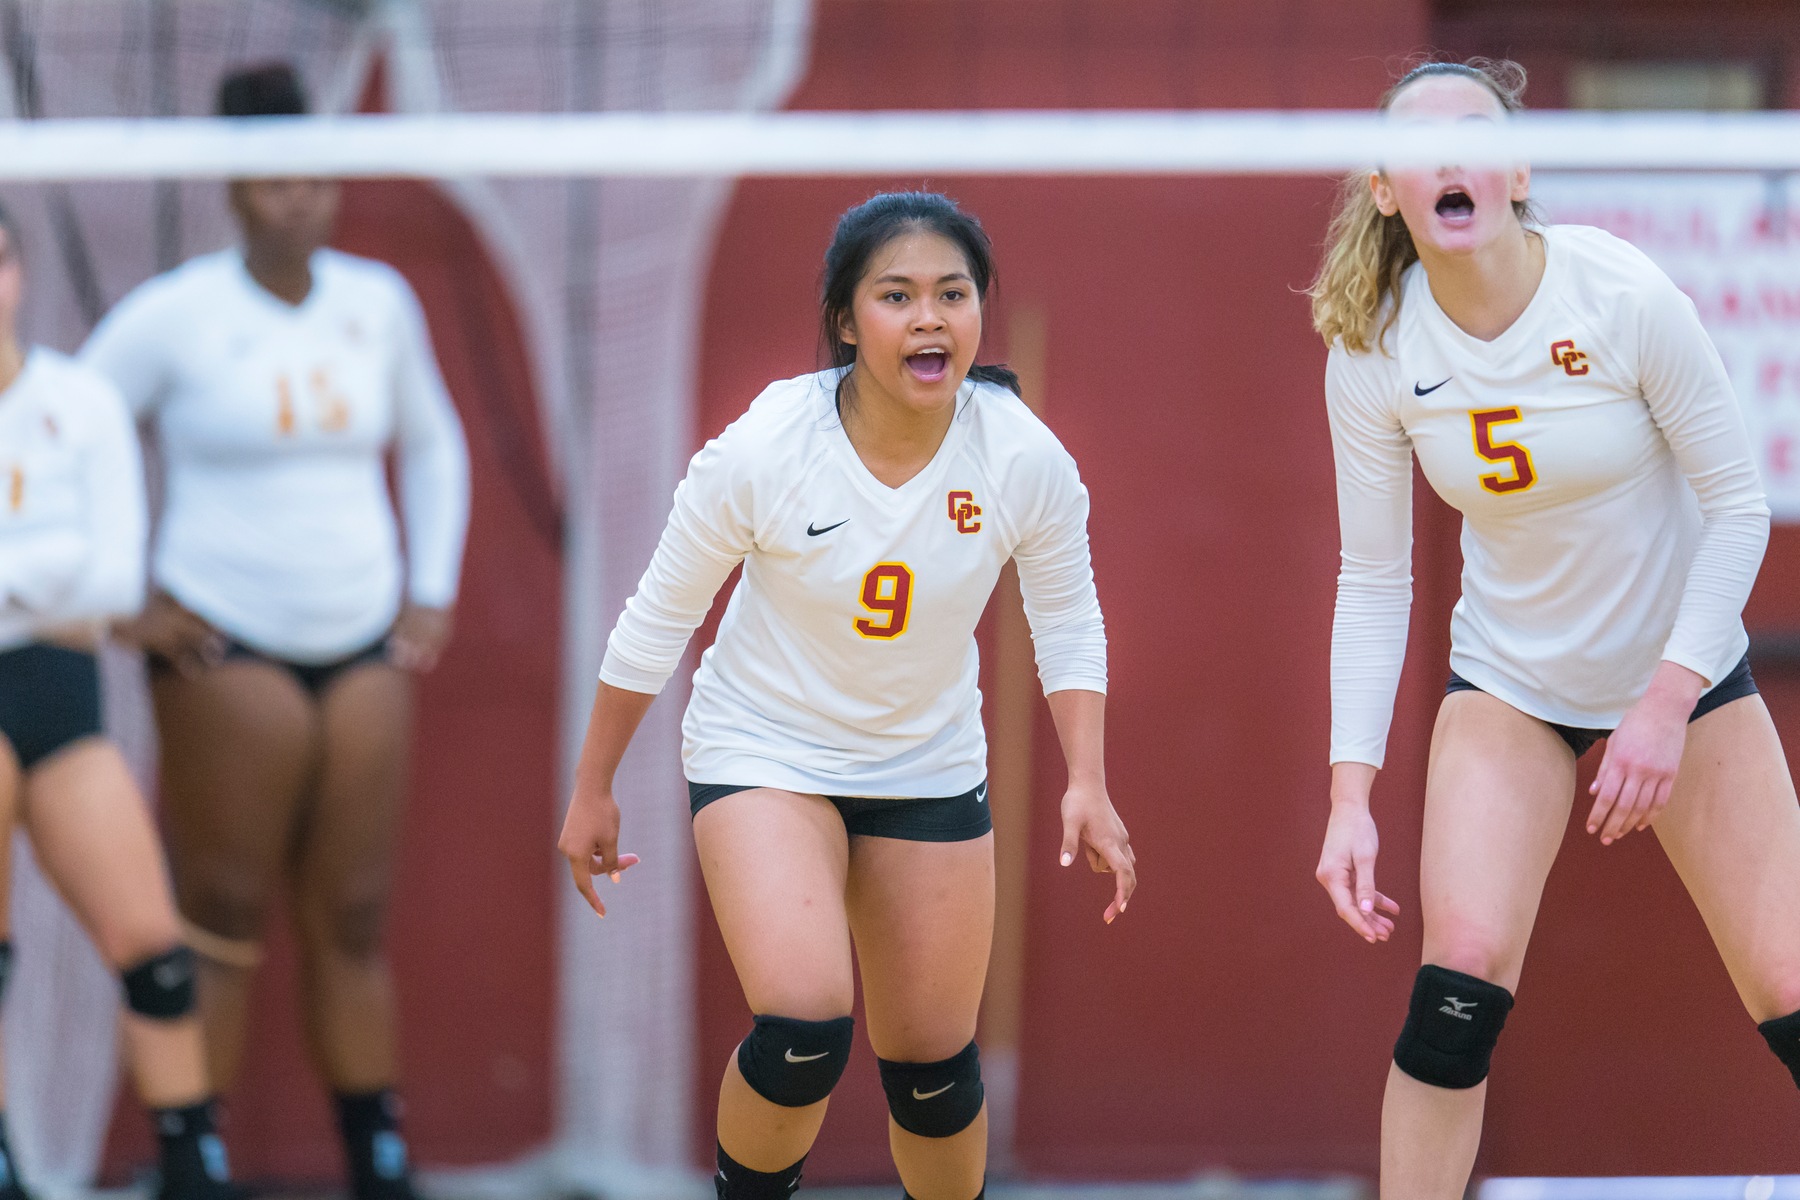 Women's Volleyball split a pair of matches last week